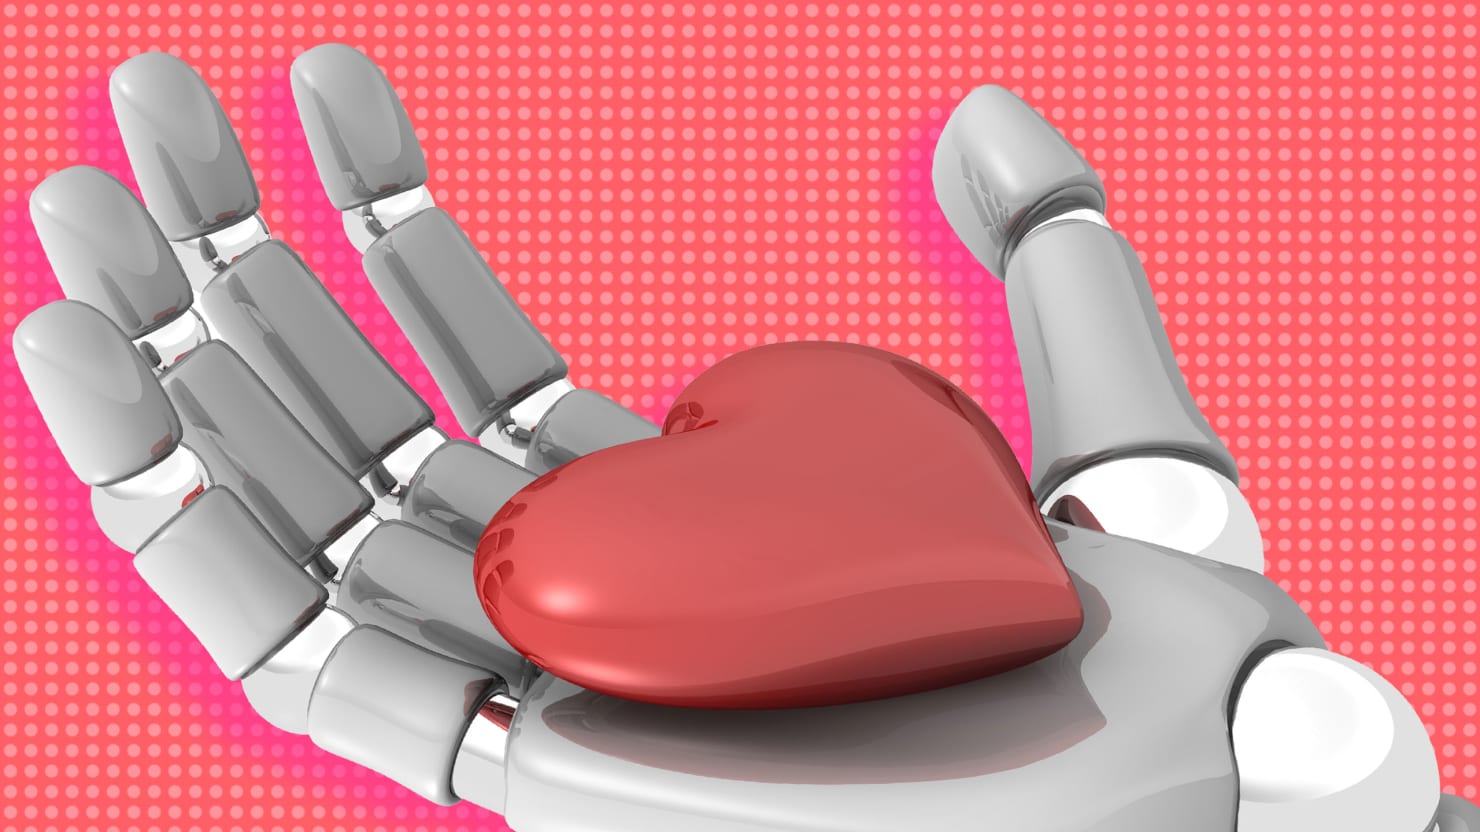 Can Your Robot Love You? - 1480 x 832 jpeg 137kB